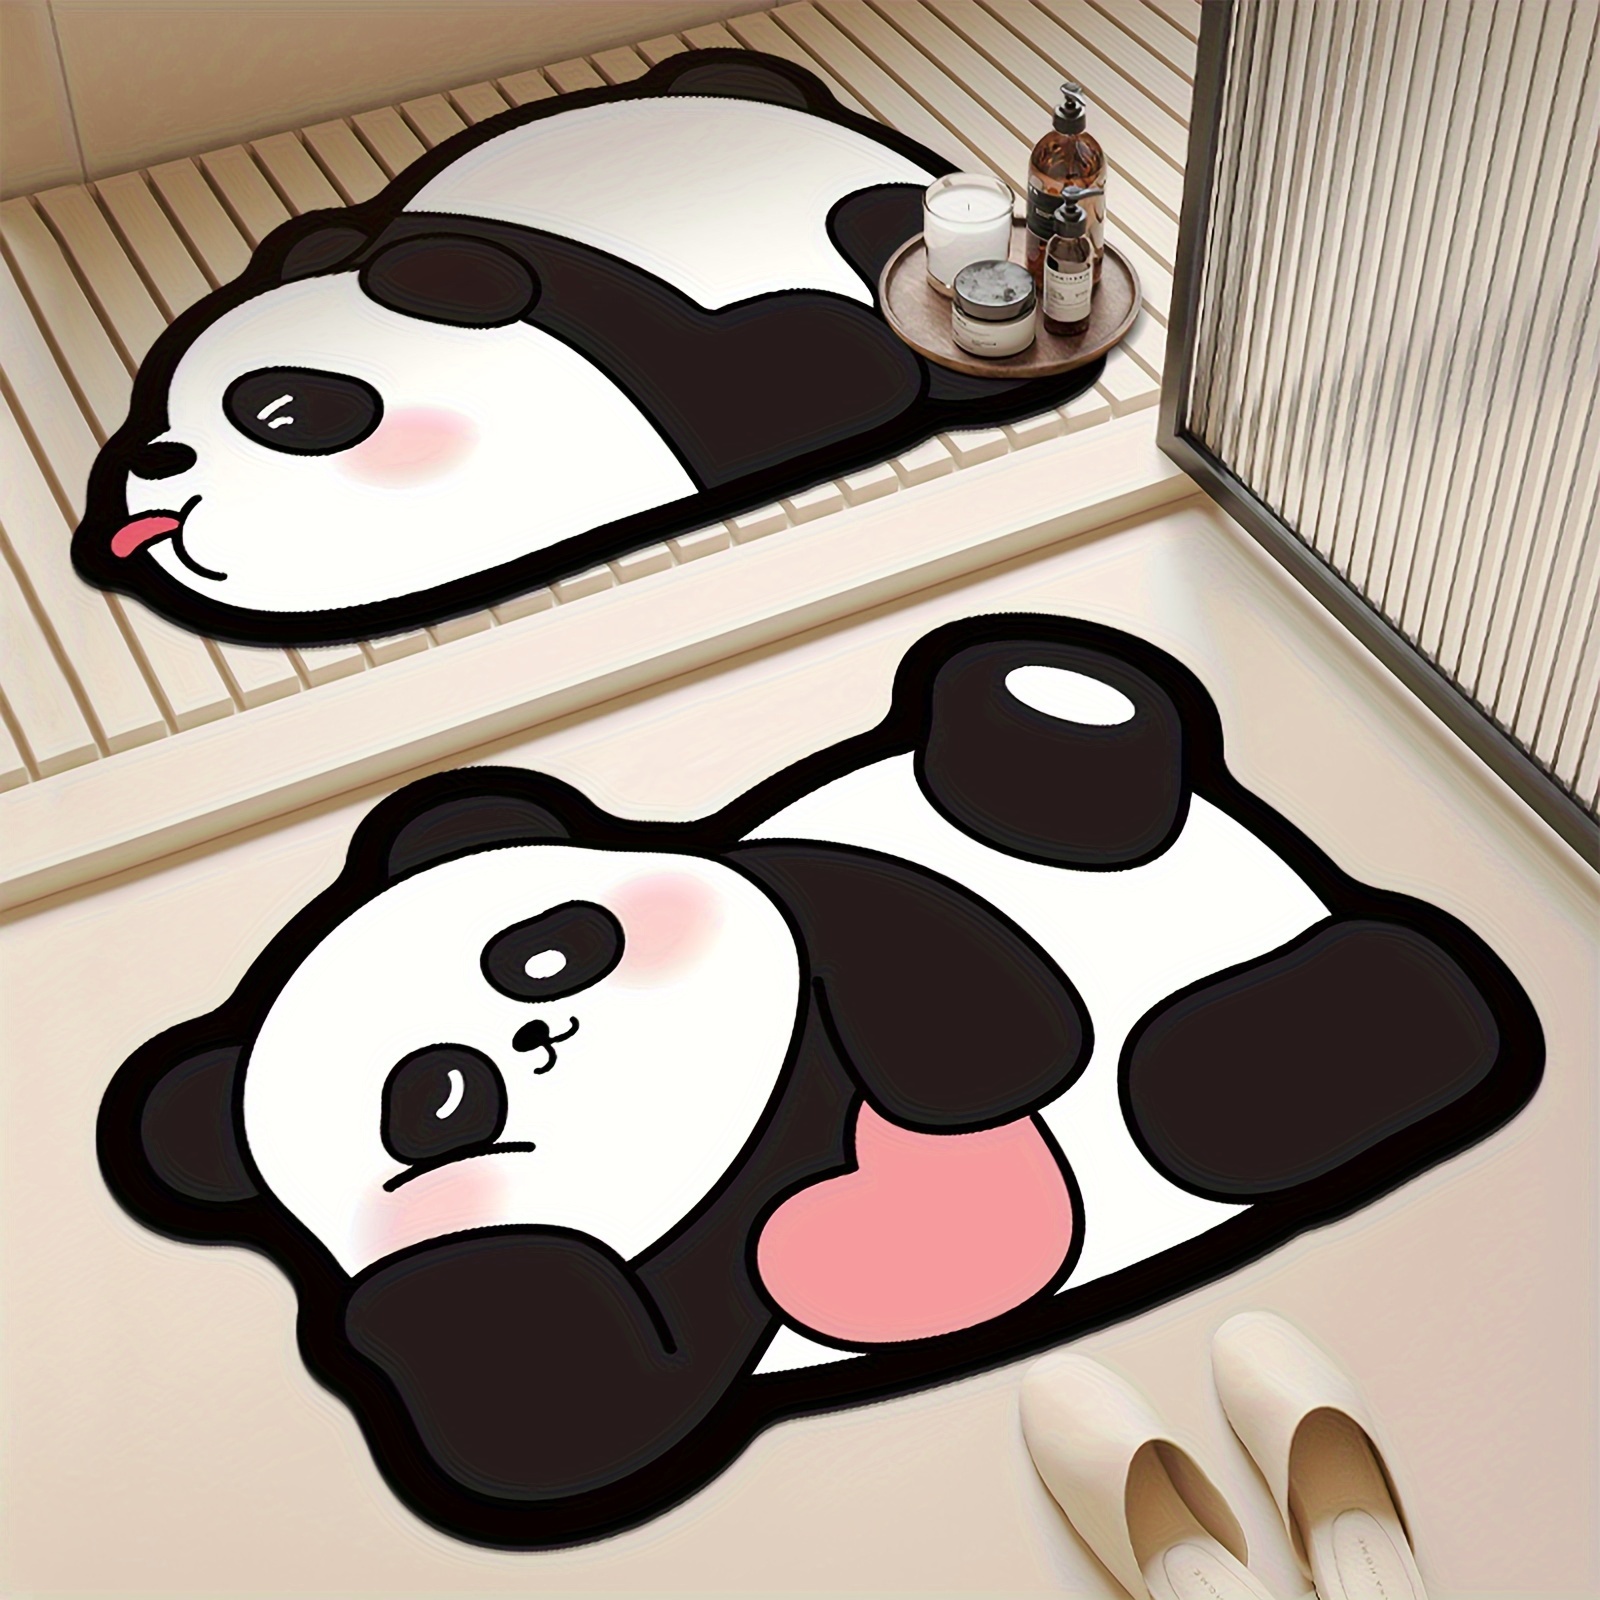 

Ultra-absorbent Non-slip Bath Mat With Cute Panda Design - Soft, Quick-dry Diatomaceous Earth Rug For Shower, Bathtub & Outdoor Use - Machine Washable Polyester Carpet For Home & Bathroom Decor